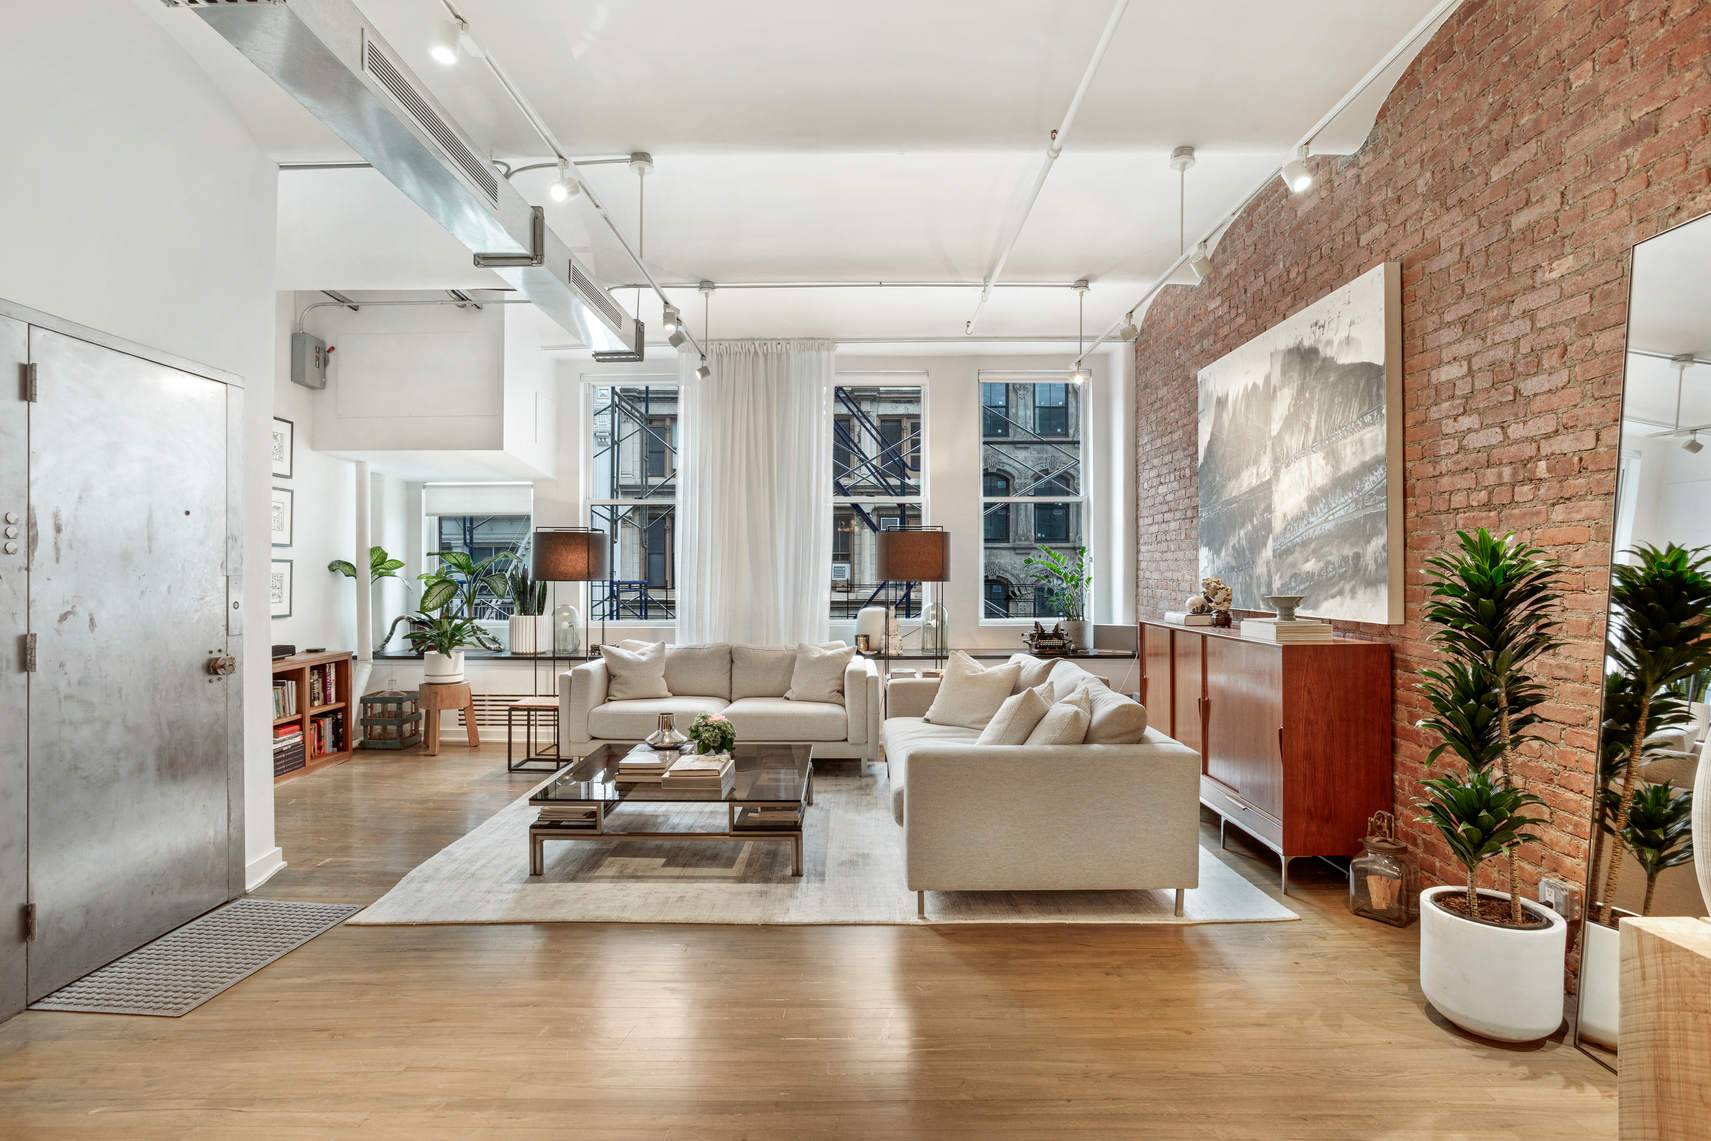 Tucked between Prince and Spring Streets on a prime block, this classic SoHo loft is a luxurious and quiet oasis with no detail spared.